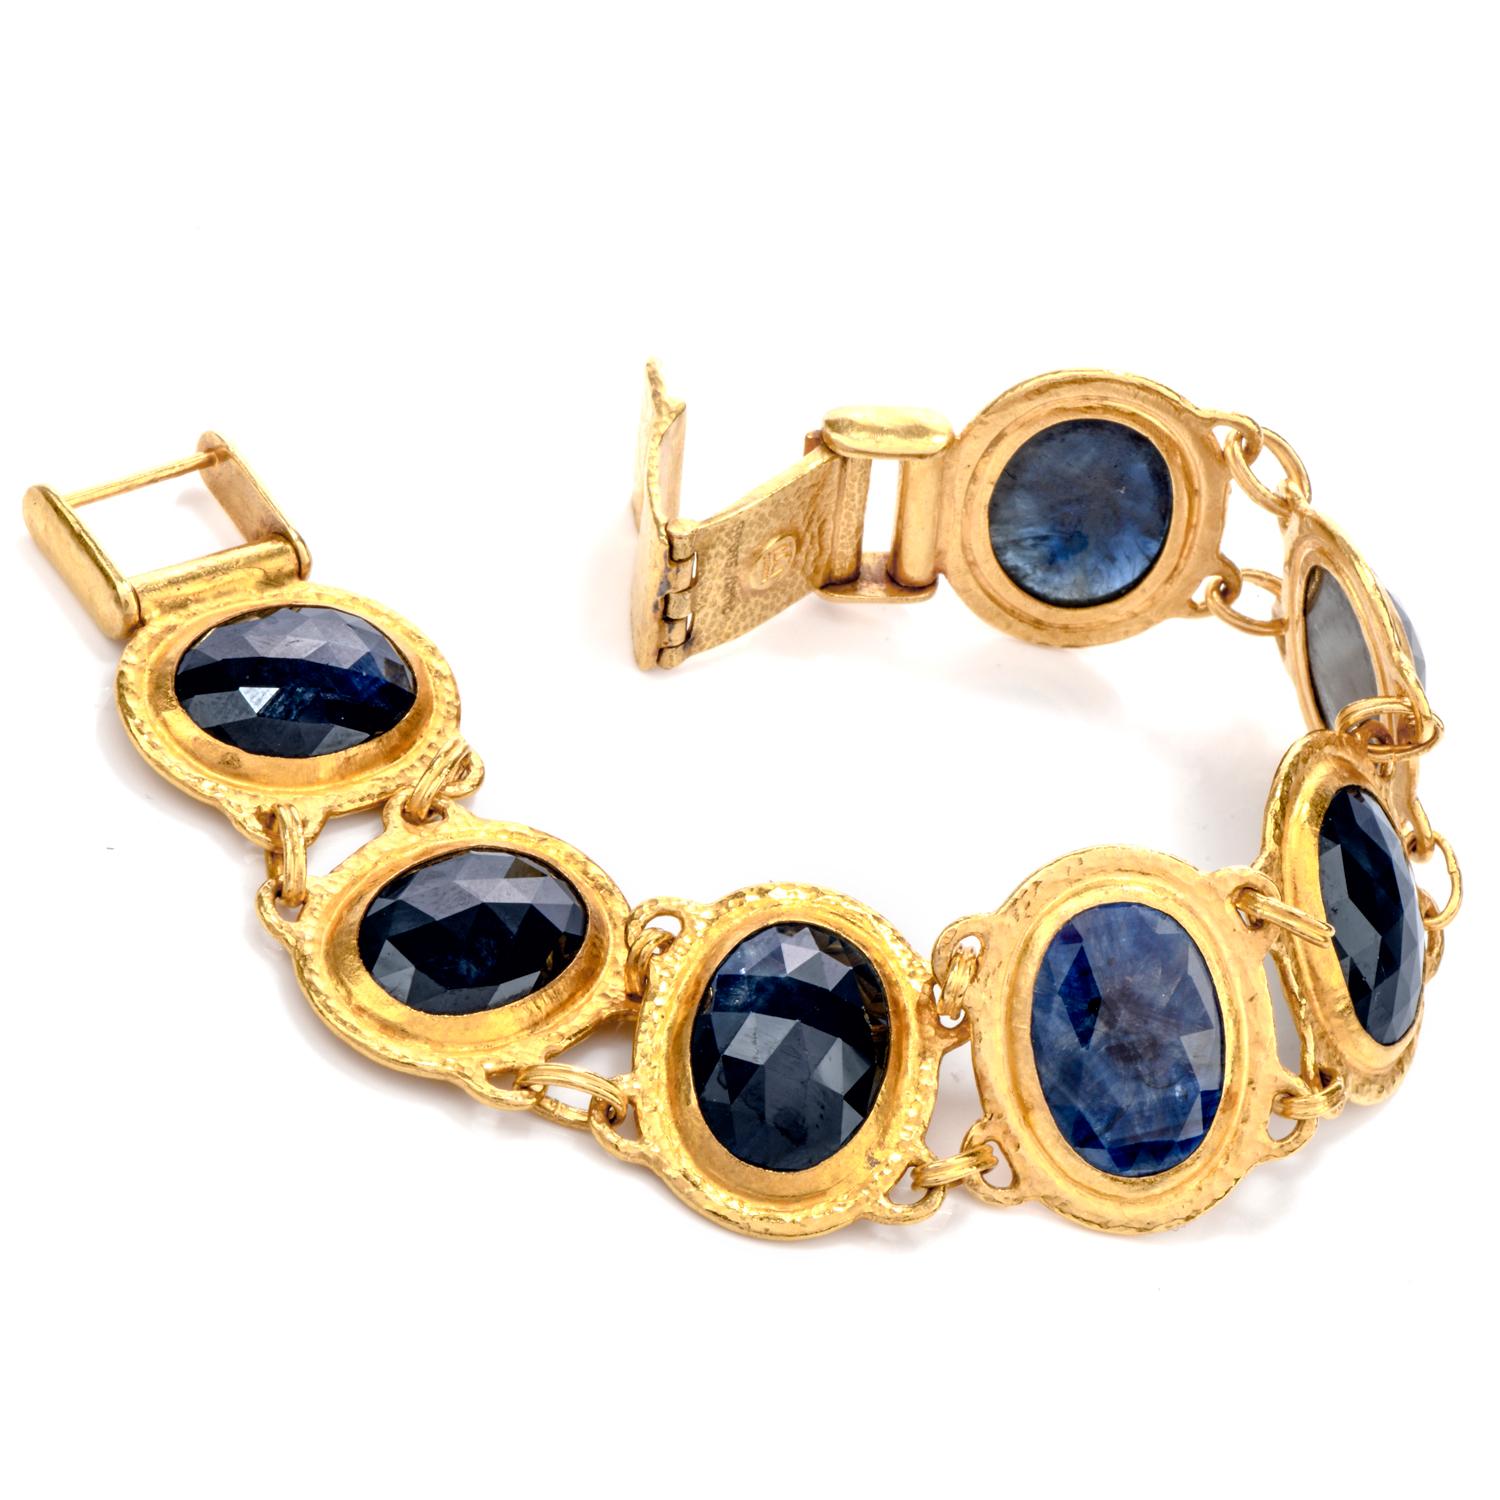 This beautiful hand embellished link bracelet was

crafted in pure 24K gold.

Featuring 7 large oval shaped in intense Blue Sapphires

each mesauring appx. 11.5 x 16.3mm e and hinged in between by 2 rings.

Sapphire weight is appx. 55.00